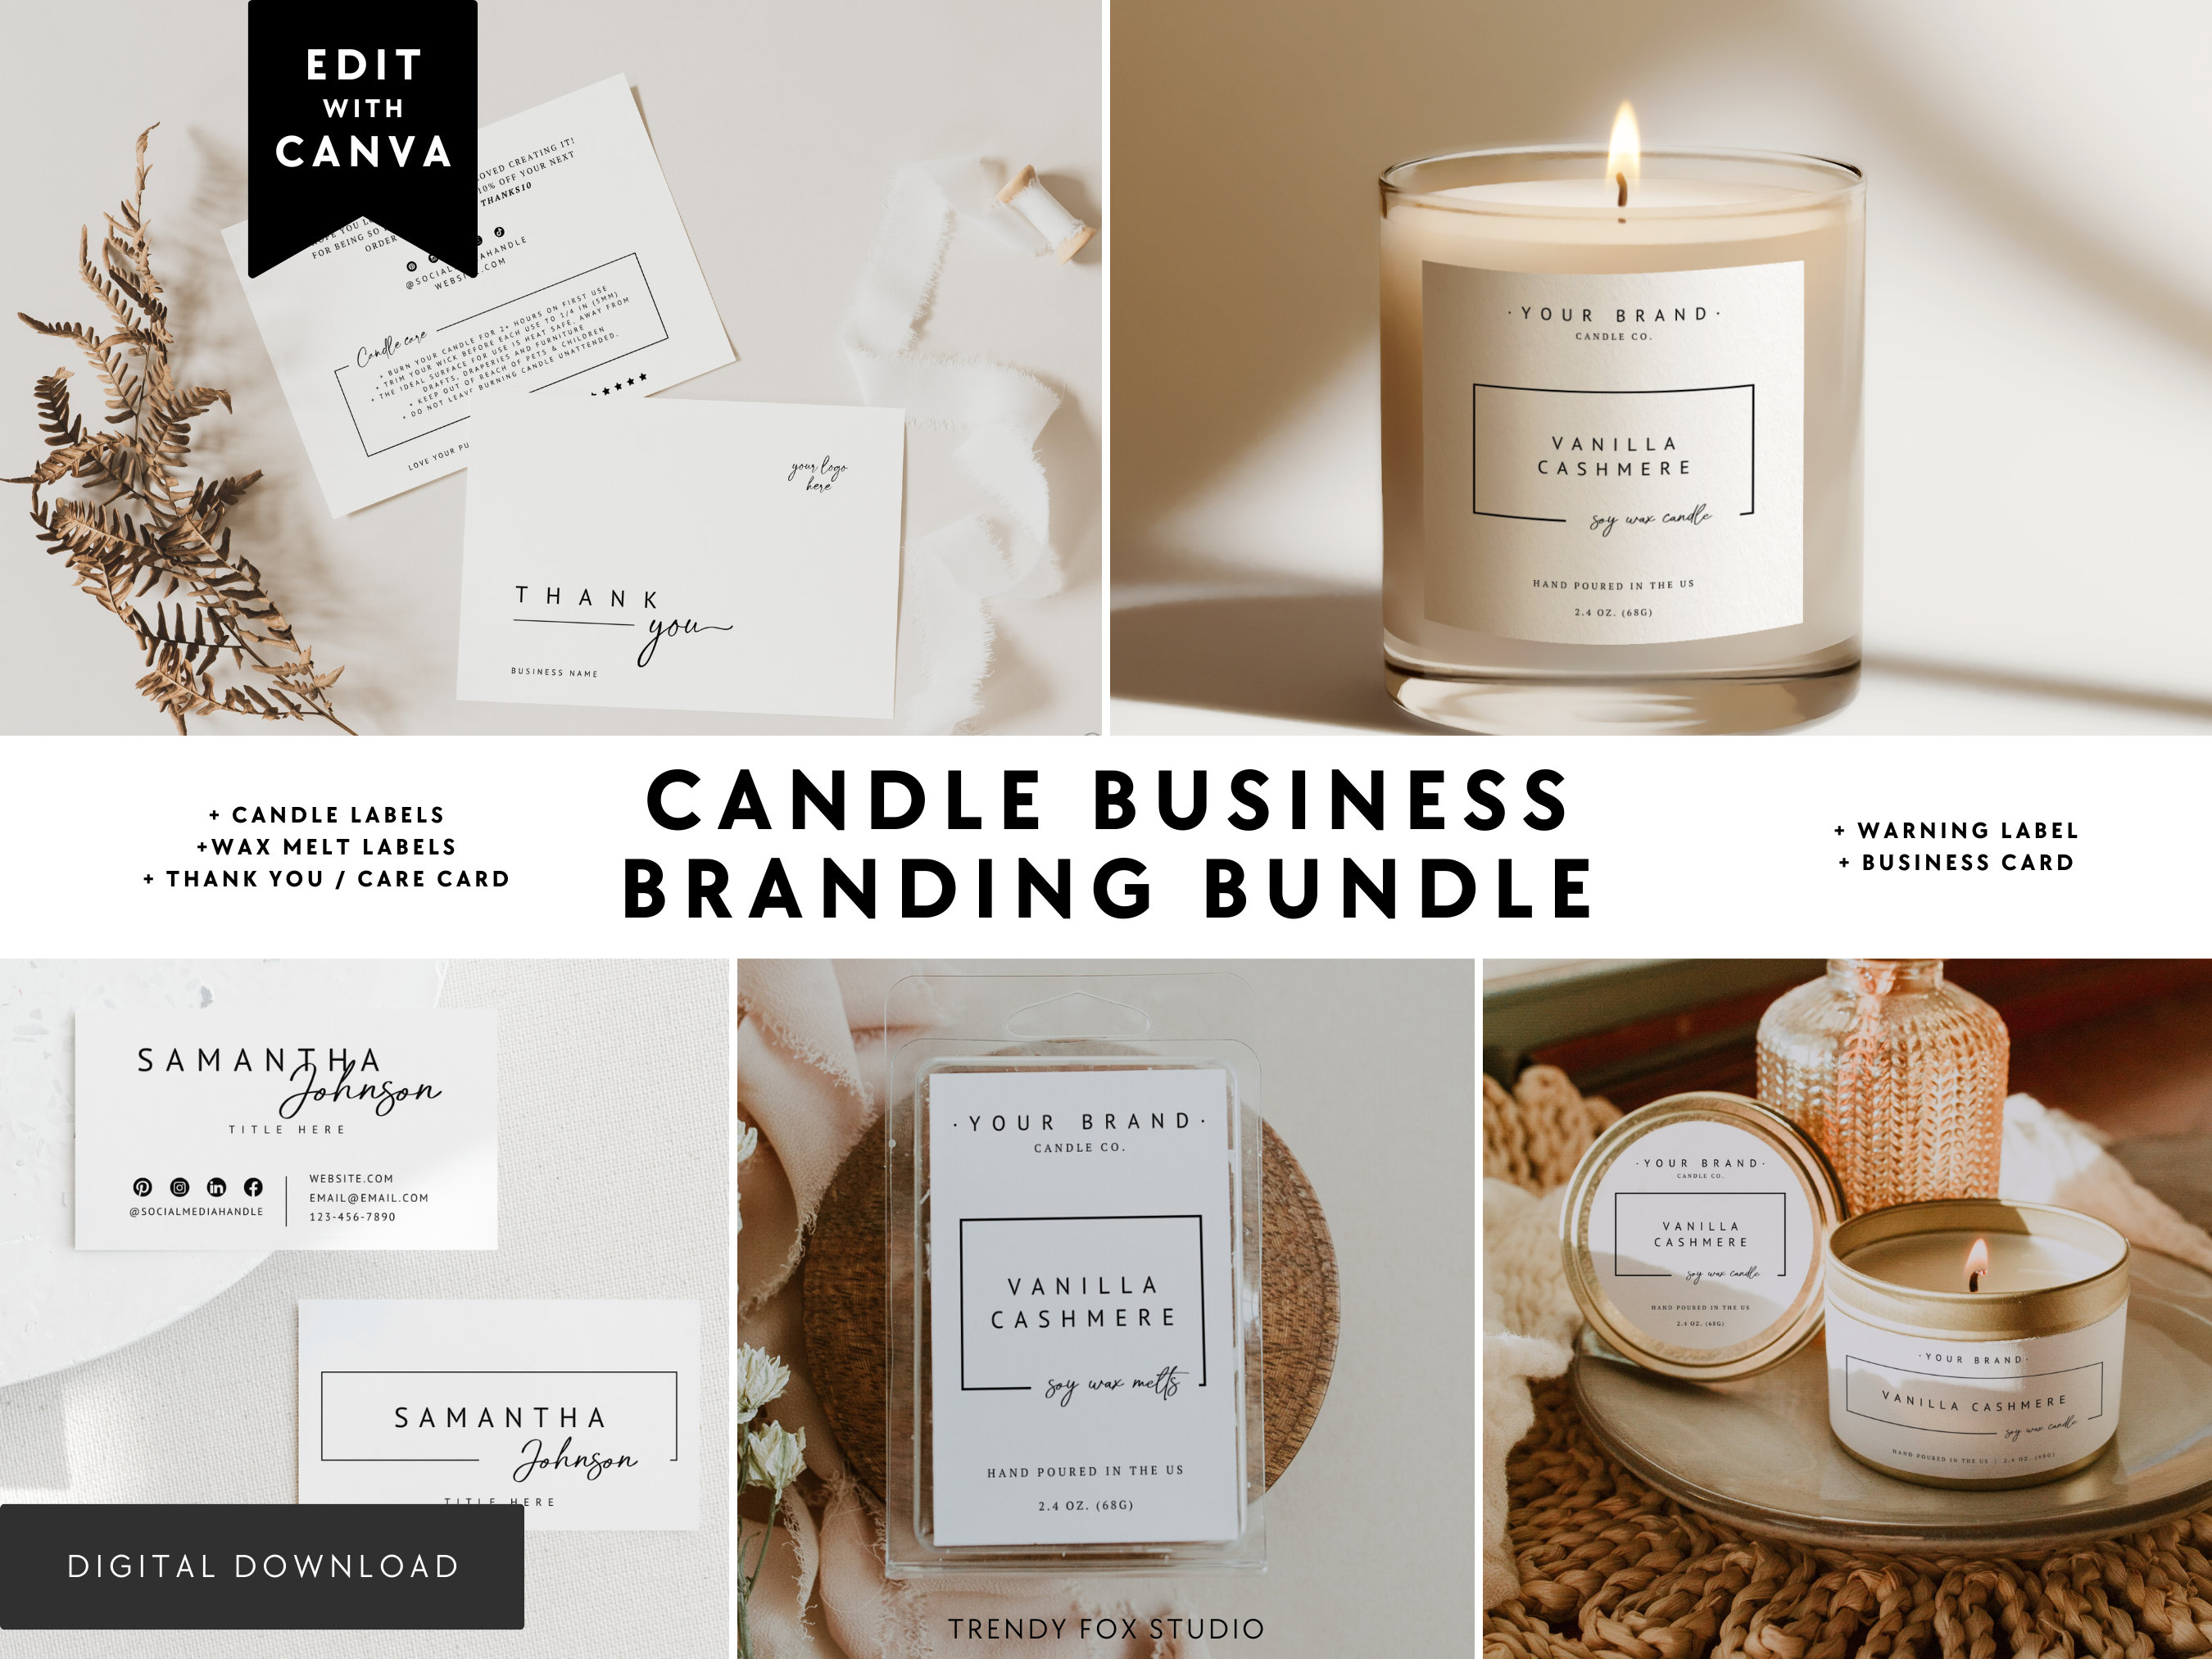 Rectangle Product Label Template Printable Minimalist Candle